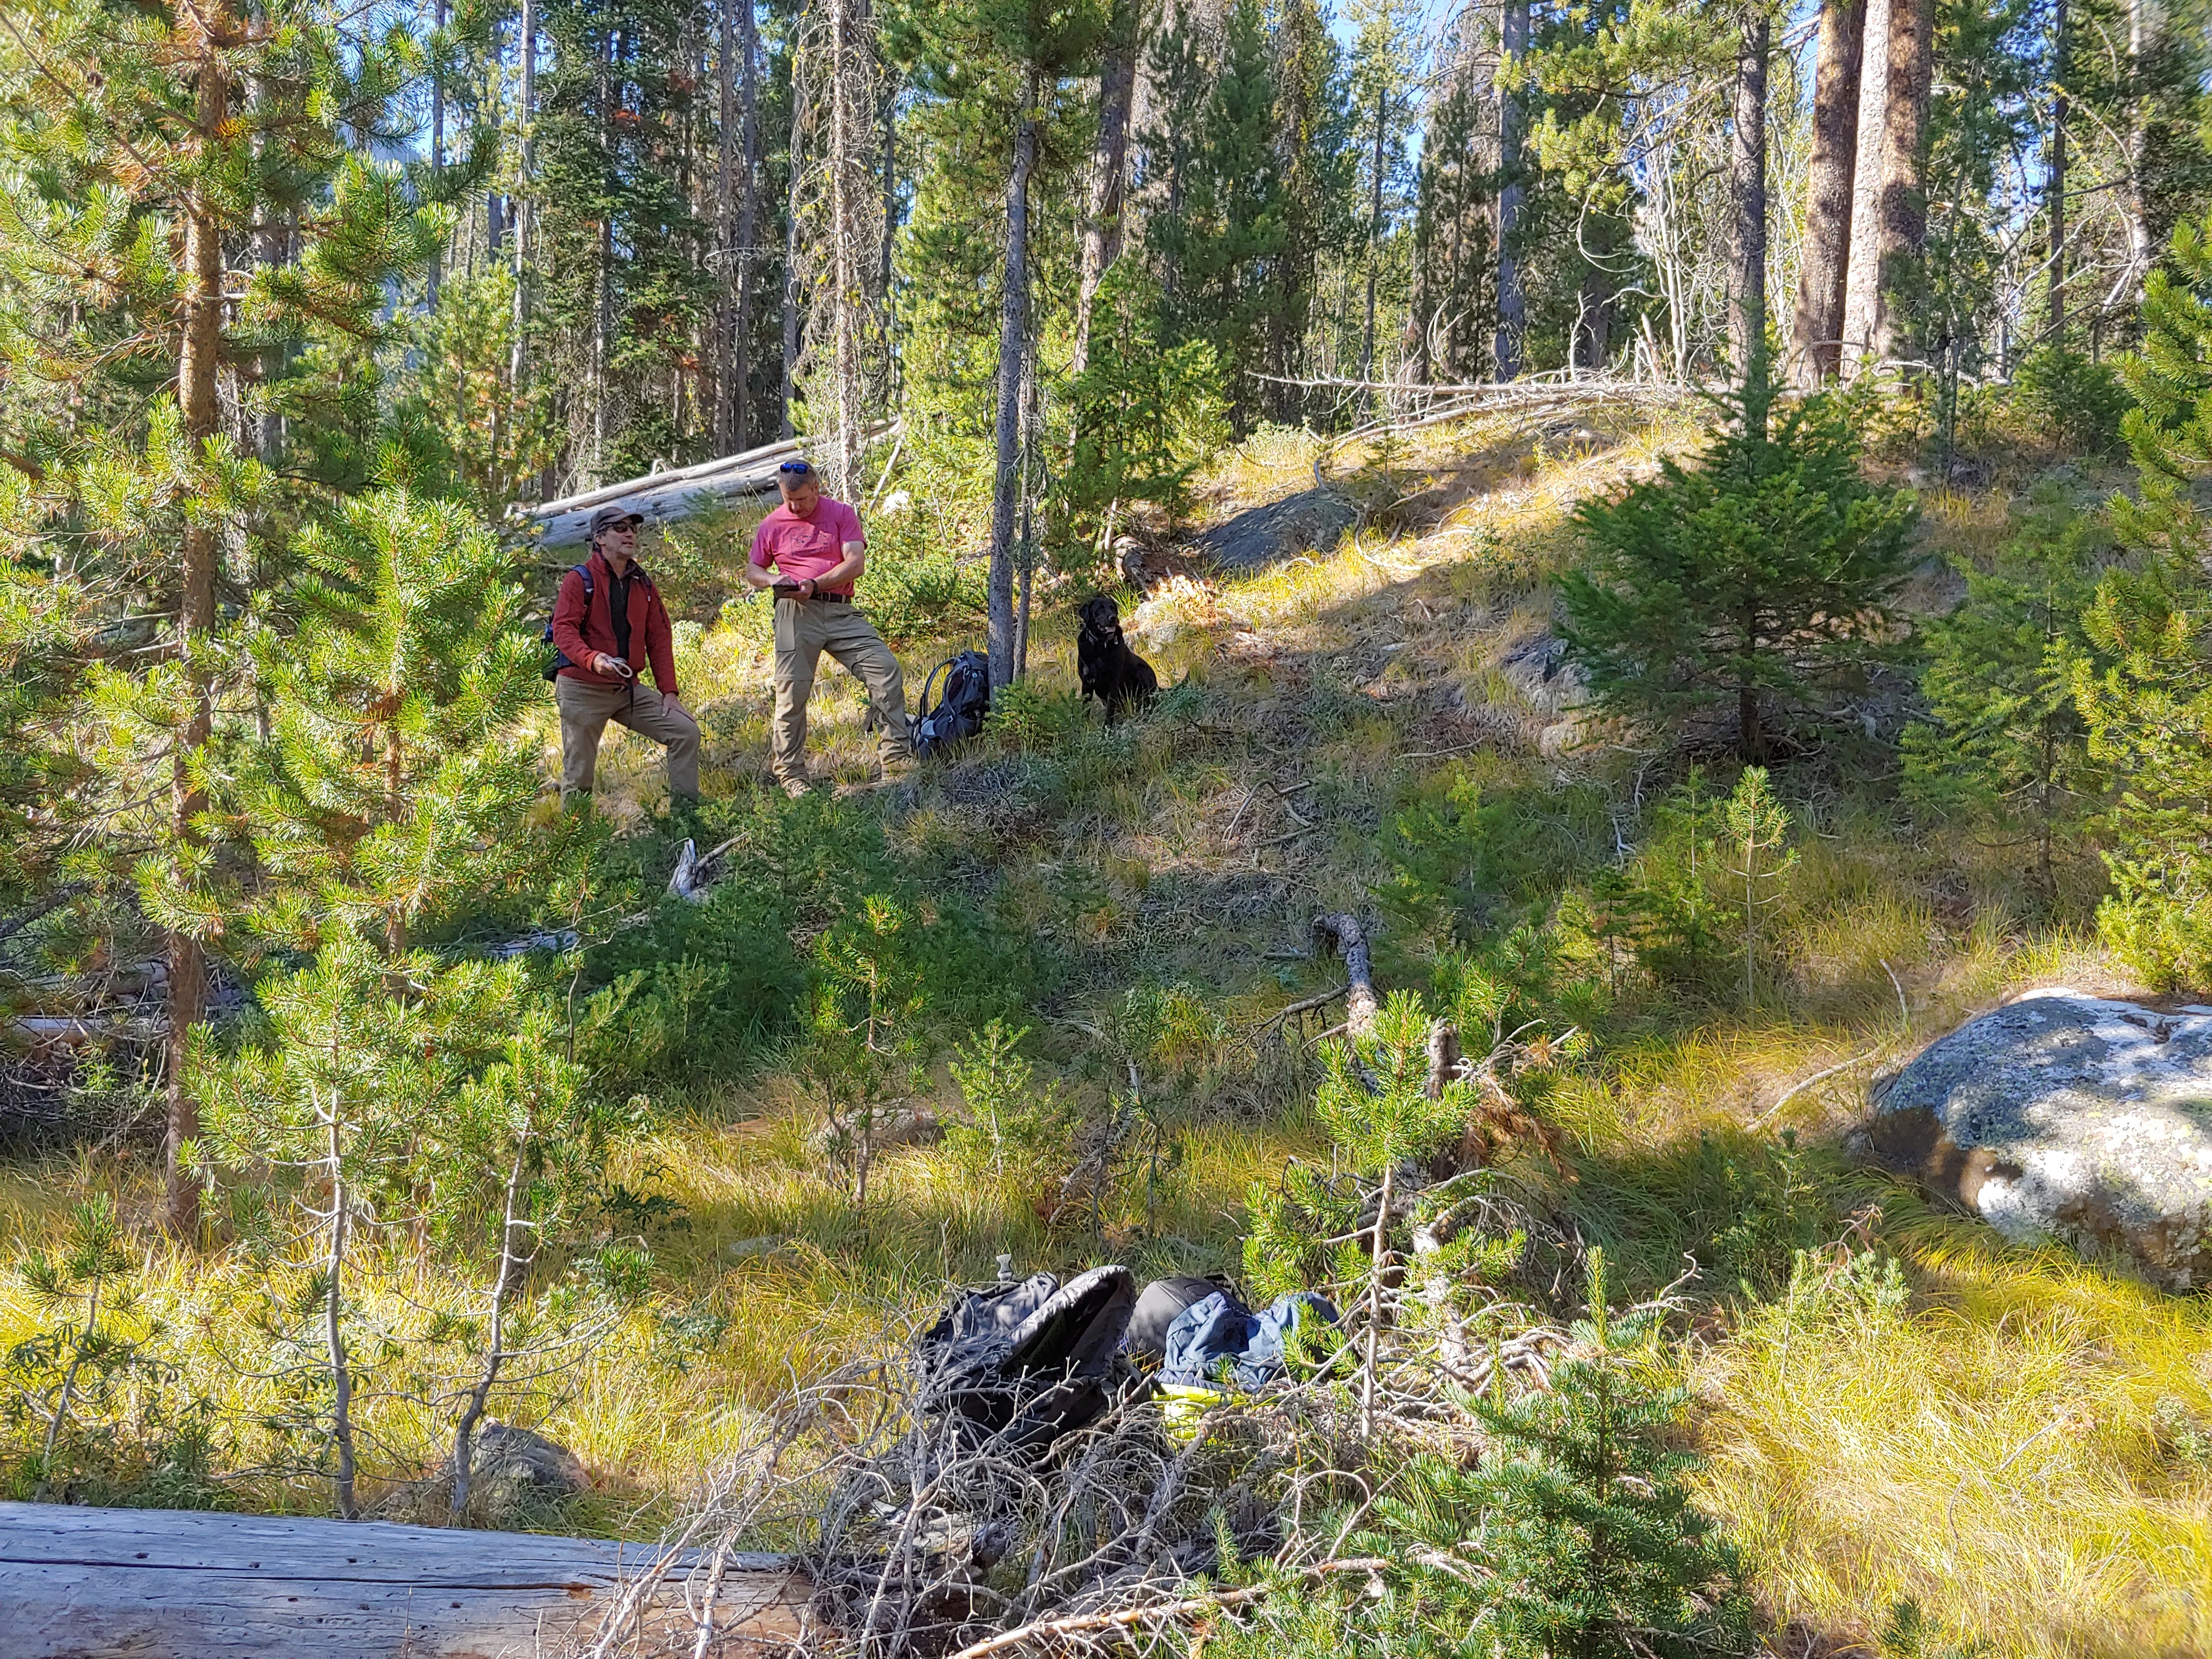 Geologists examine a pre-2020 fault scarp along the Sawtooth
fault.